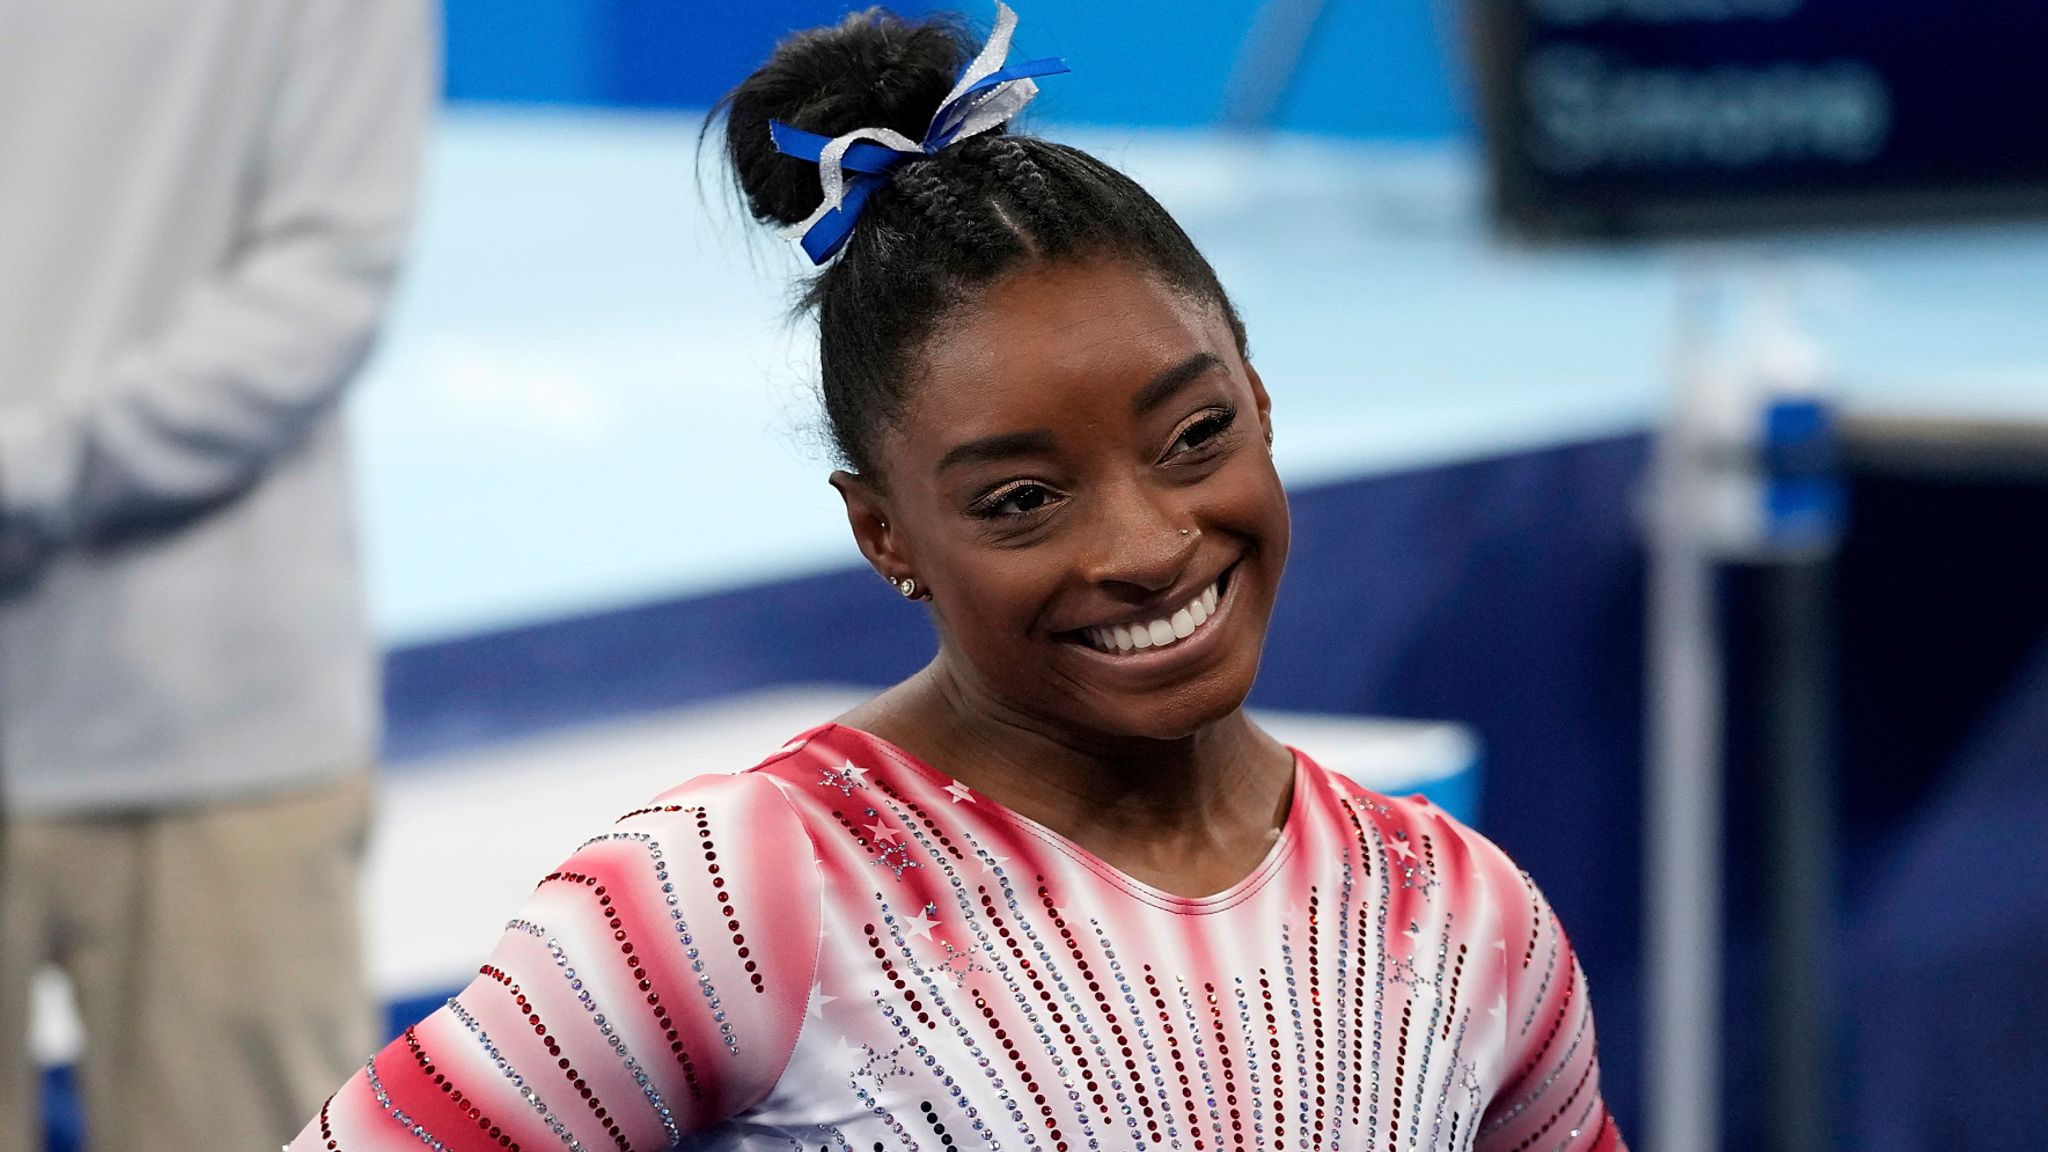 Overland Iop| #1 Intensive Outpatient Programs | Los Angeles Ca What Happened to Simone Biles in Tokyo